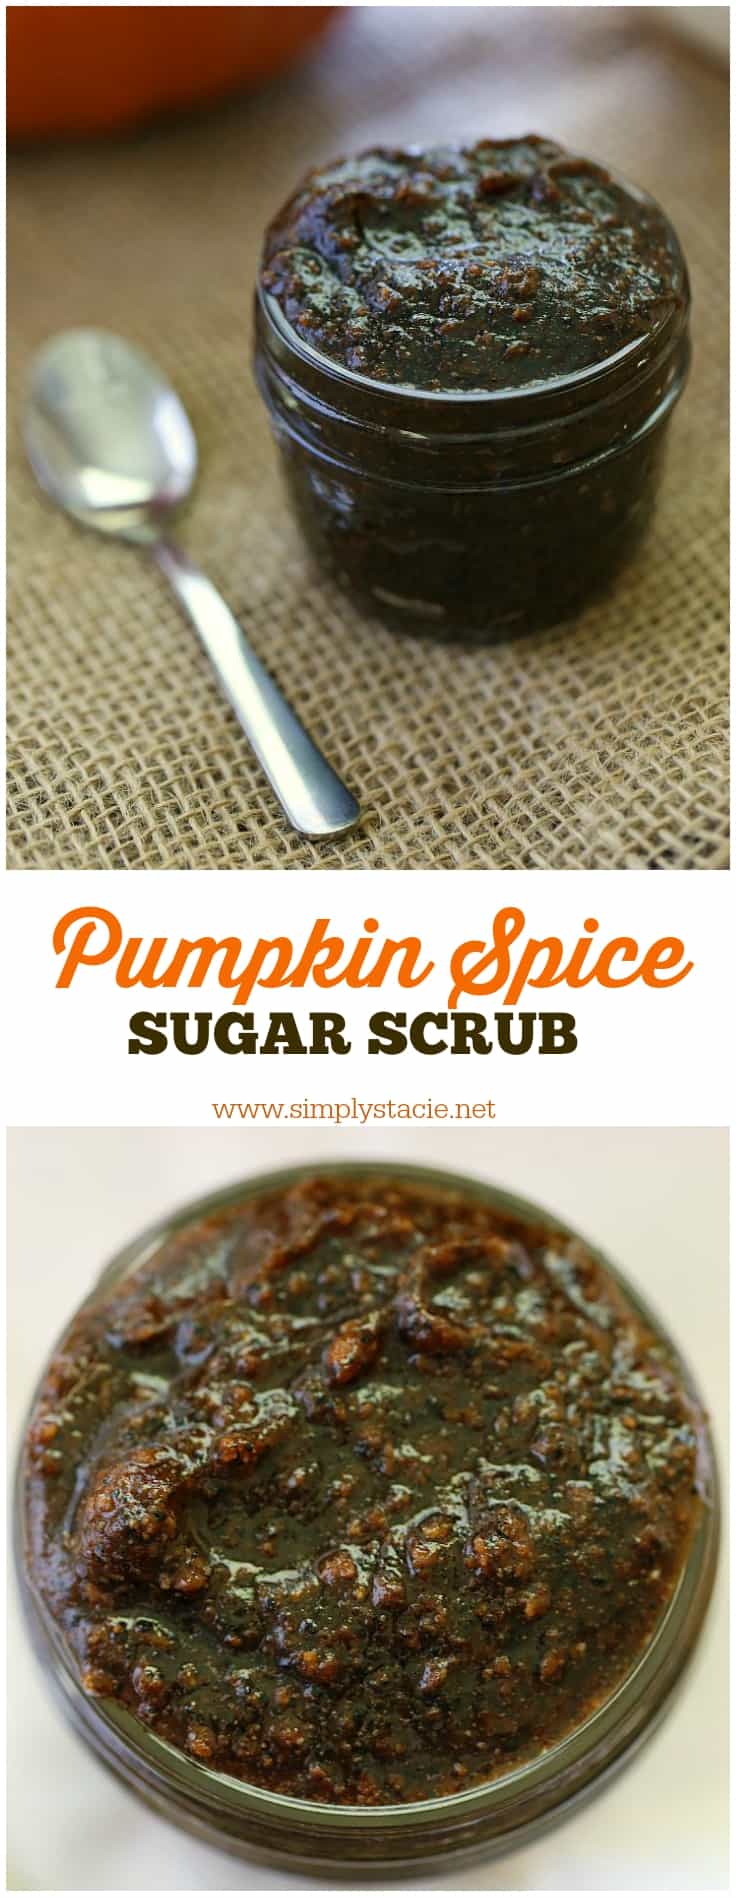 Pumpkin Spice Sugar Scrub - Embrace the scent of fall with this amazing DIY Pumpkin Spice Sugar Scrub. You'll be tempted to eat it, but don't! Your skin will be in for a real treat.